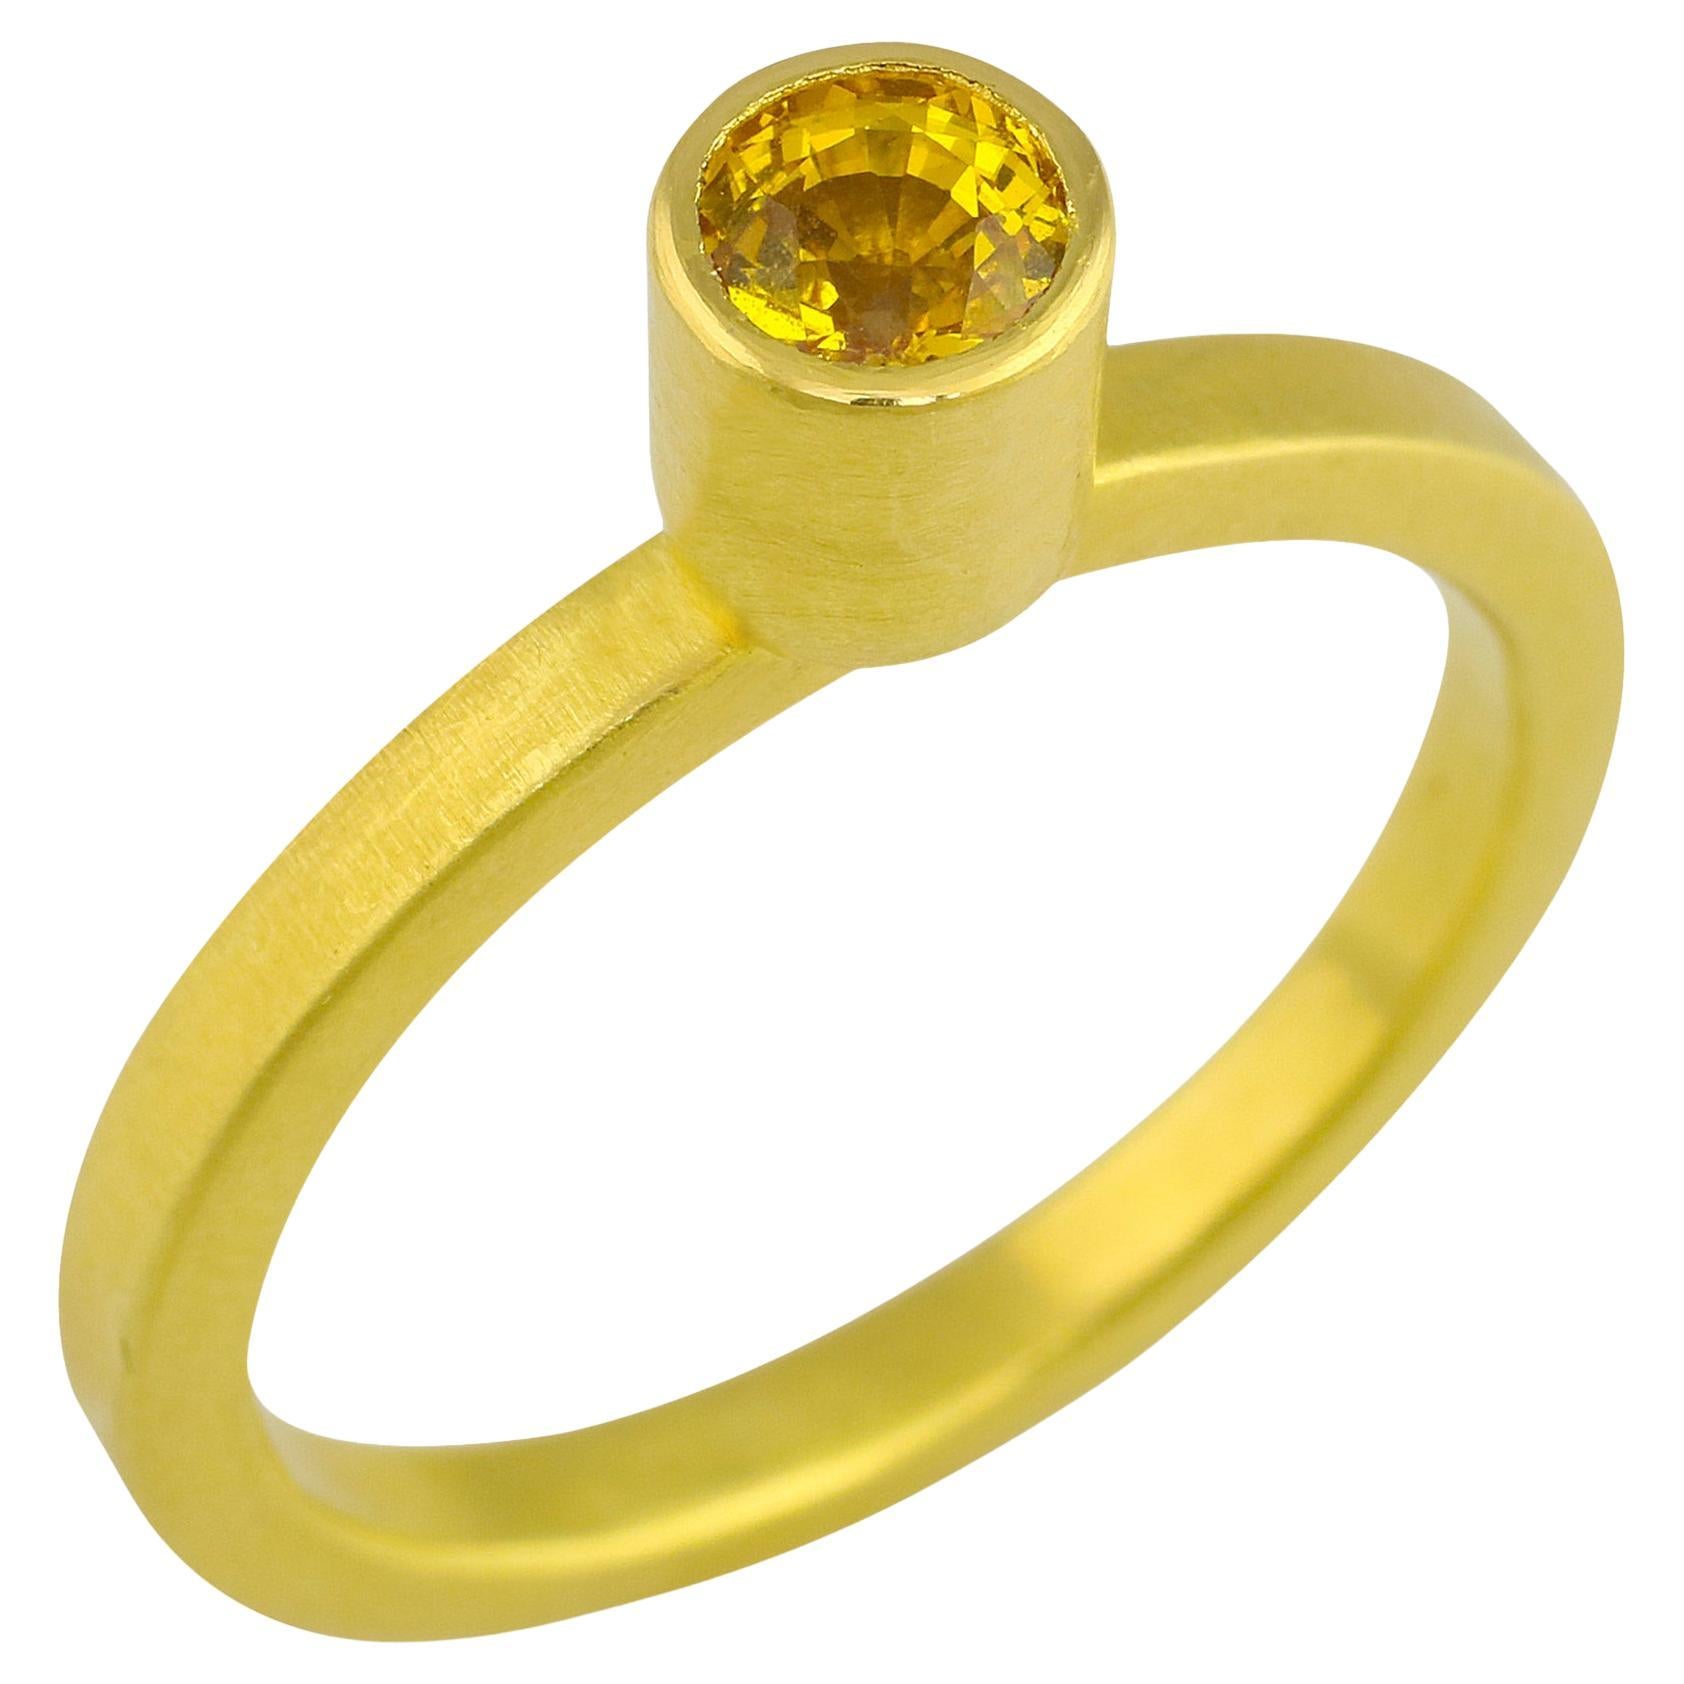 PHILIPPE SPENCER .65 Ct. Yellow Sapphire in 22K and 20K Gold Solitaire Ring For Sale